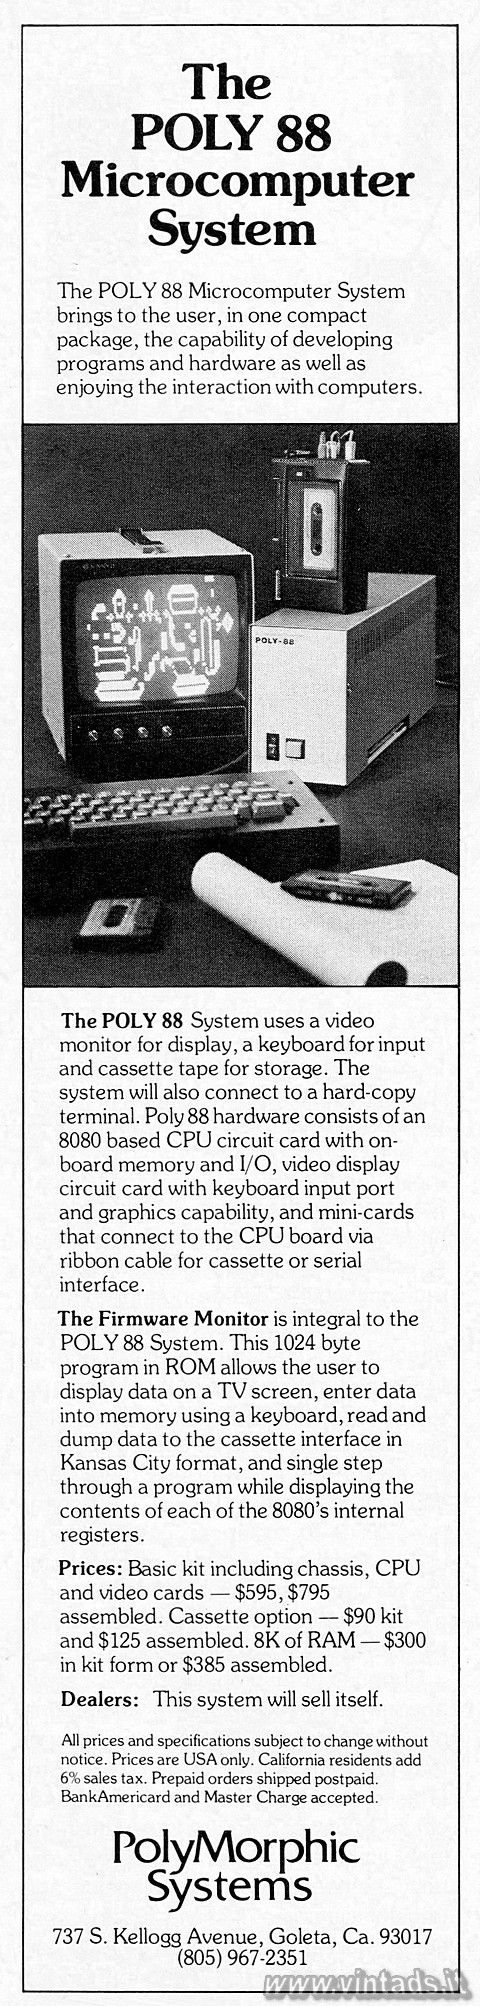 The POLY 88 Microcomputer System

The POLY 88 Mi